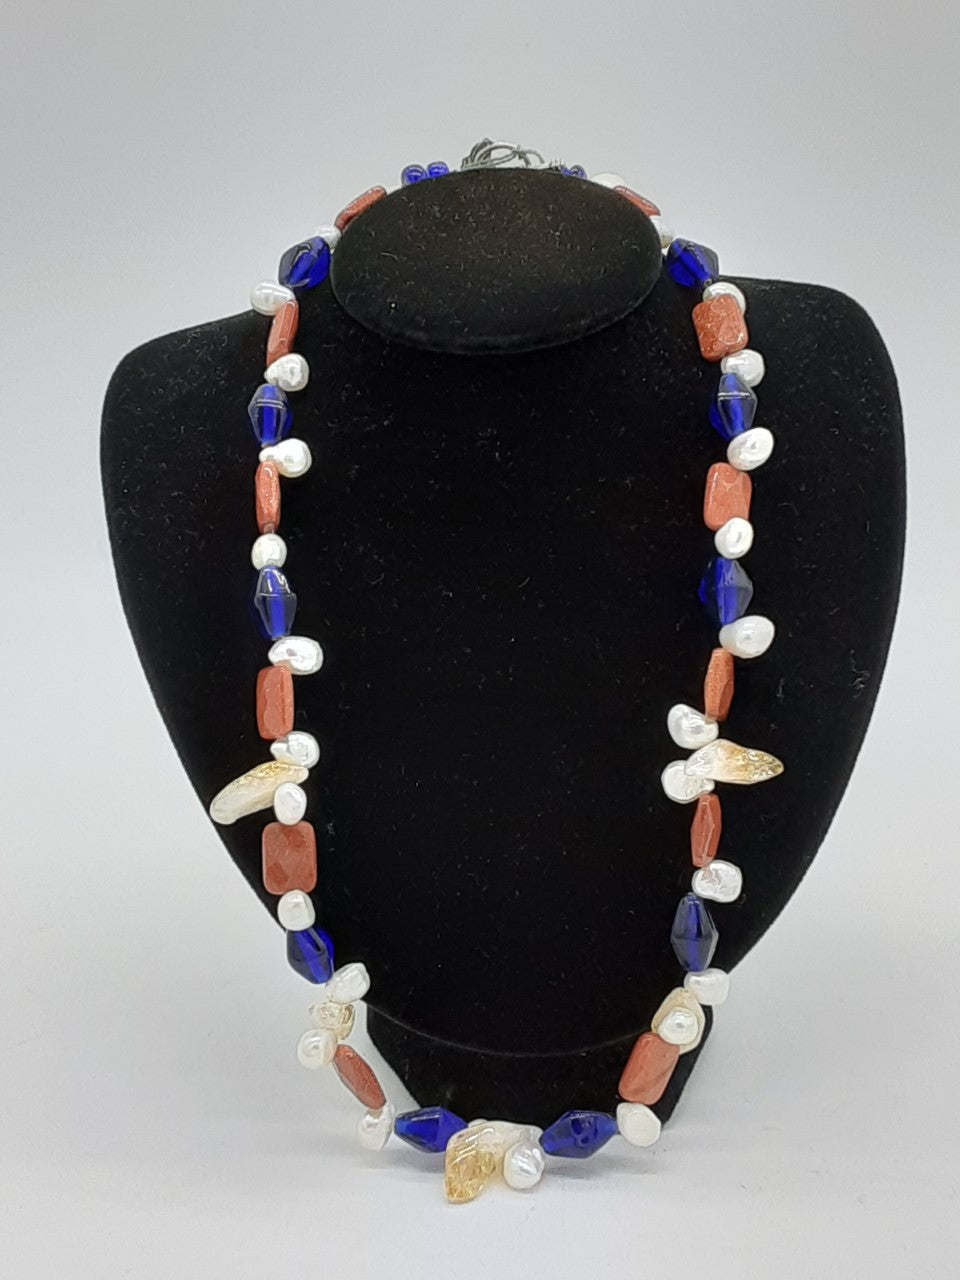 Necklace with alternating beads of blue glass, brown, pearl, and quartz